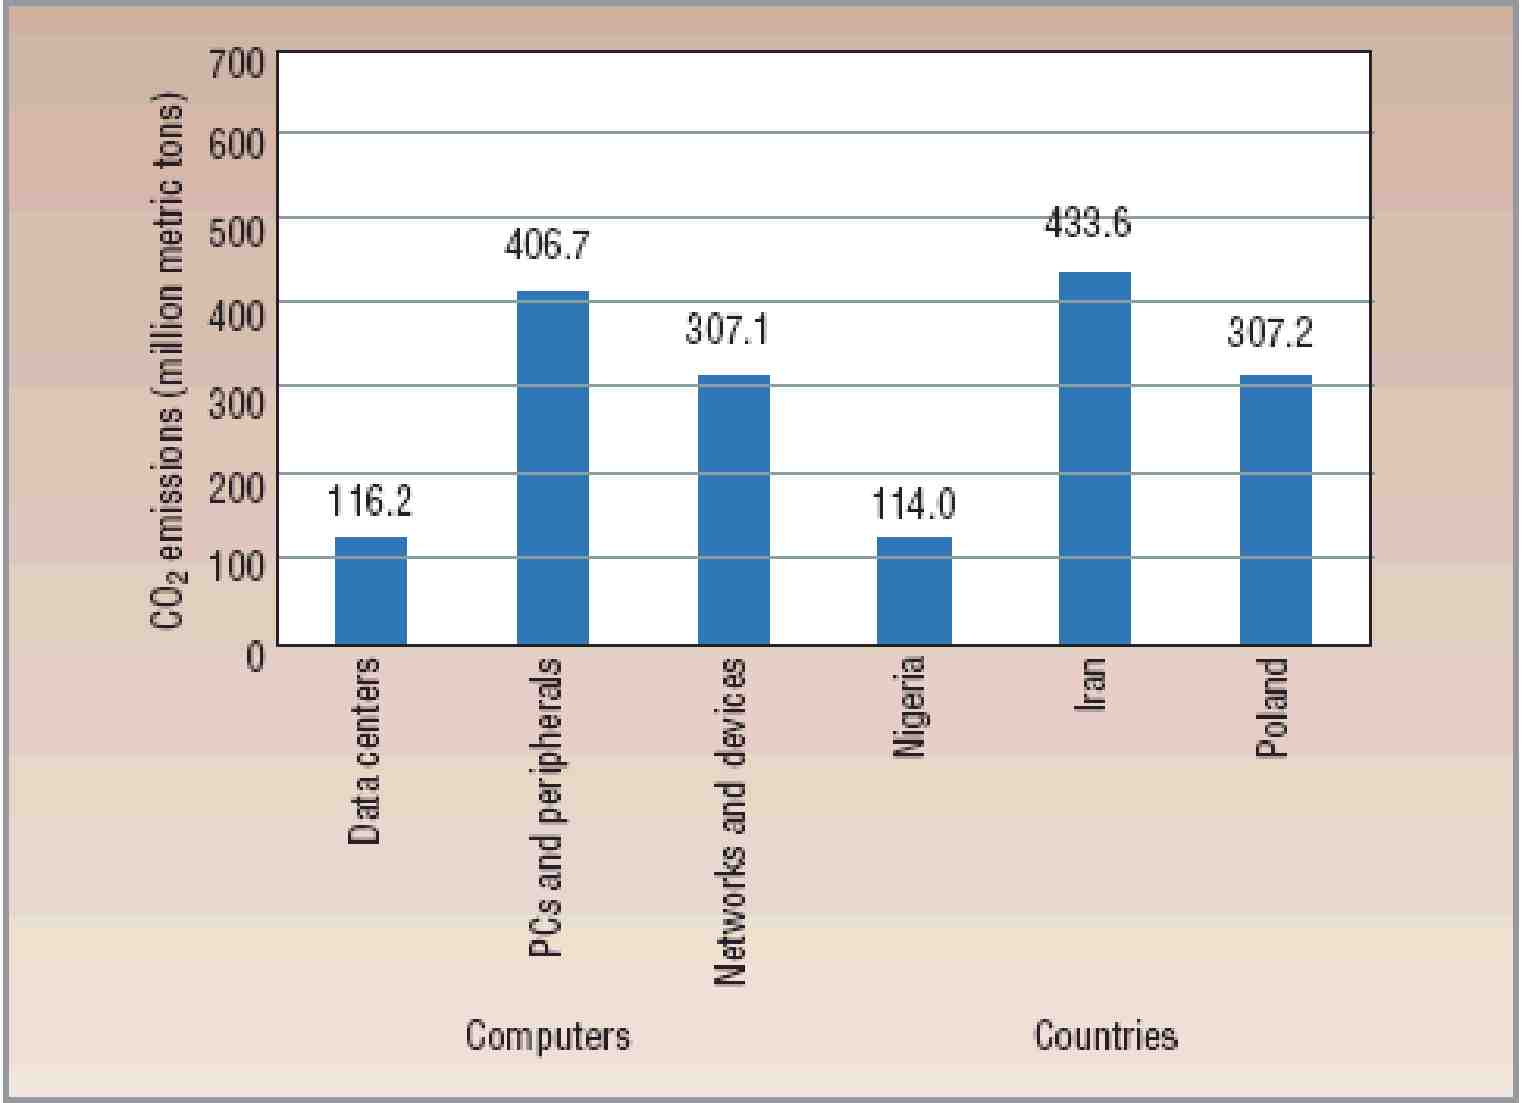 Figure 1. Carbon dioxide emissions from the energy consumed by data centers, PCs and peripherals, and networks and devices are roughly equivalent to those of Nigeria, Iran, and Poland and account for 2 percent of the total world carbon footprint.